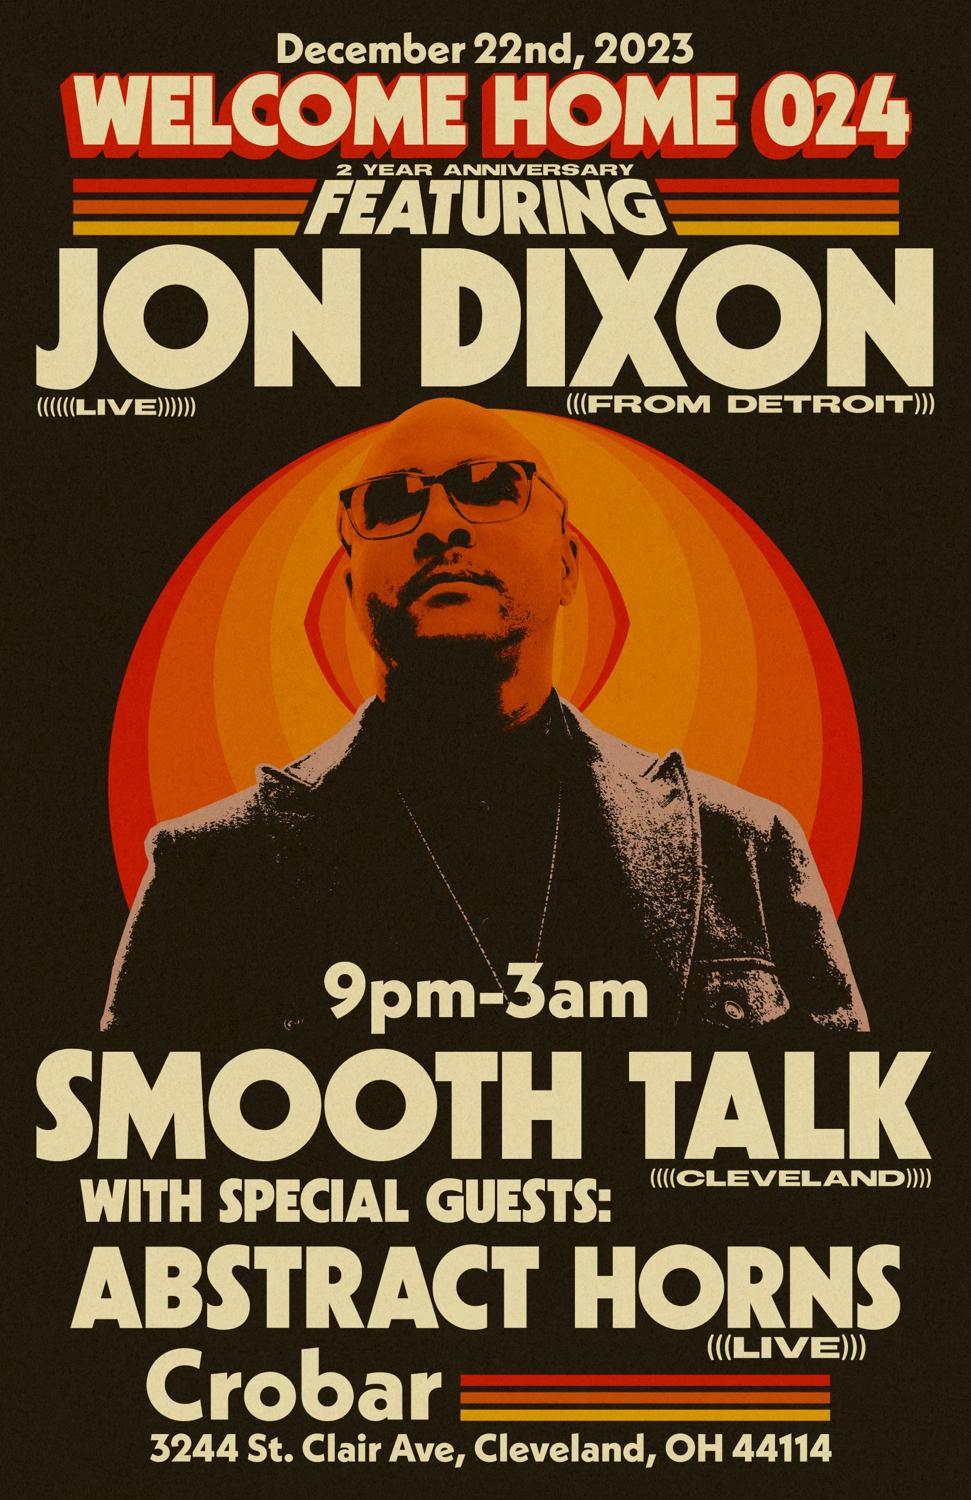 Welcome Home 024: Feat. Jon Dixon [Det]  / Smooth Talk / Abstract Horns 